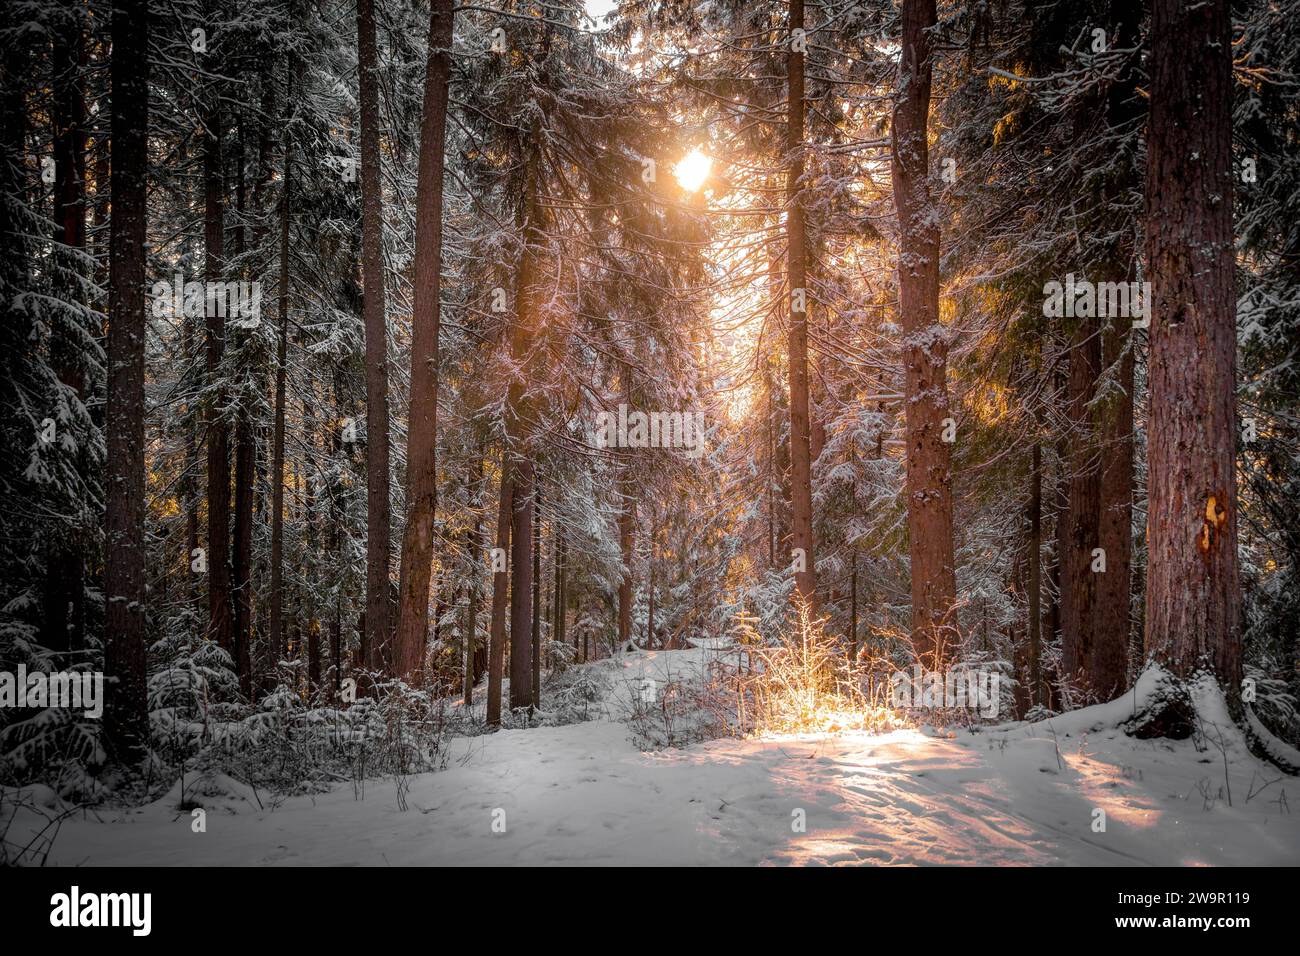 The beautiful winter forest with snow-covered pine trees with the sunset colors during the cold evening in Siberian taiga at Khanty-Mansiysk, Russia. Stock Photo